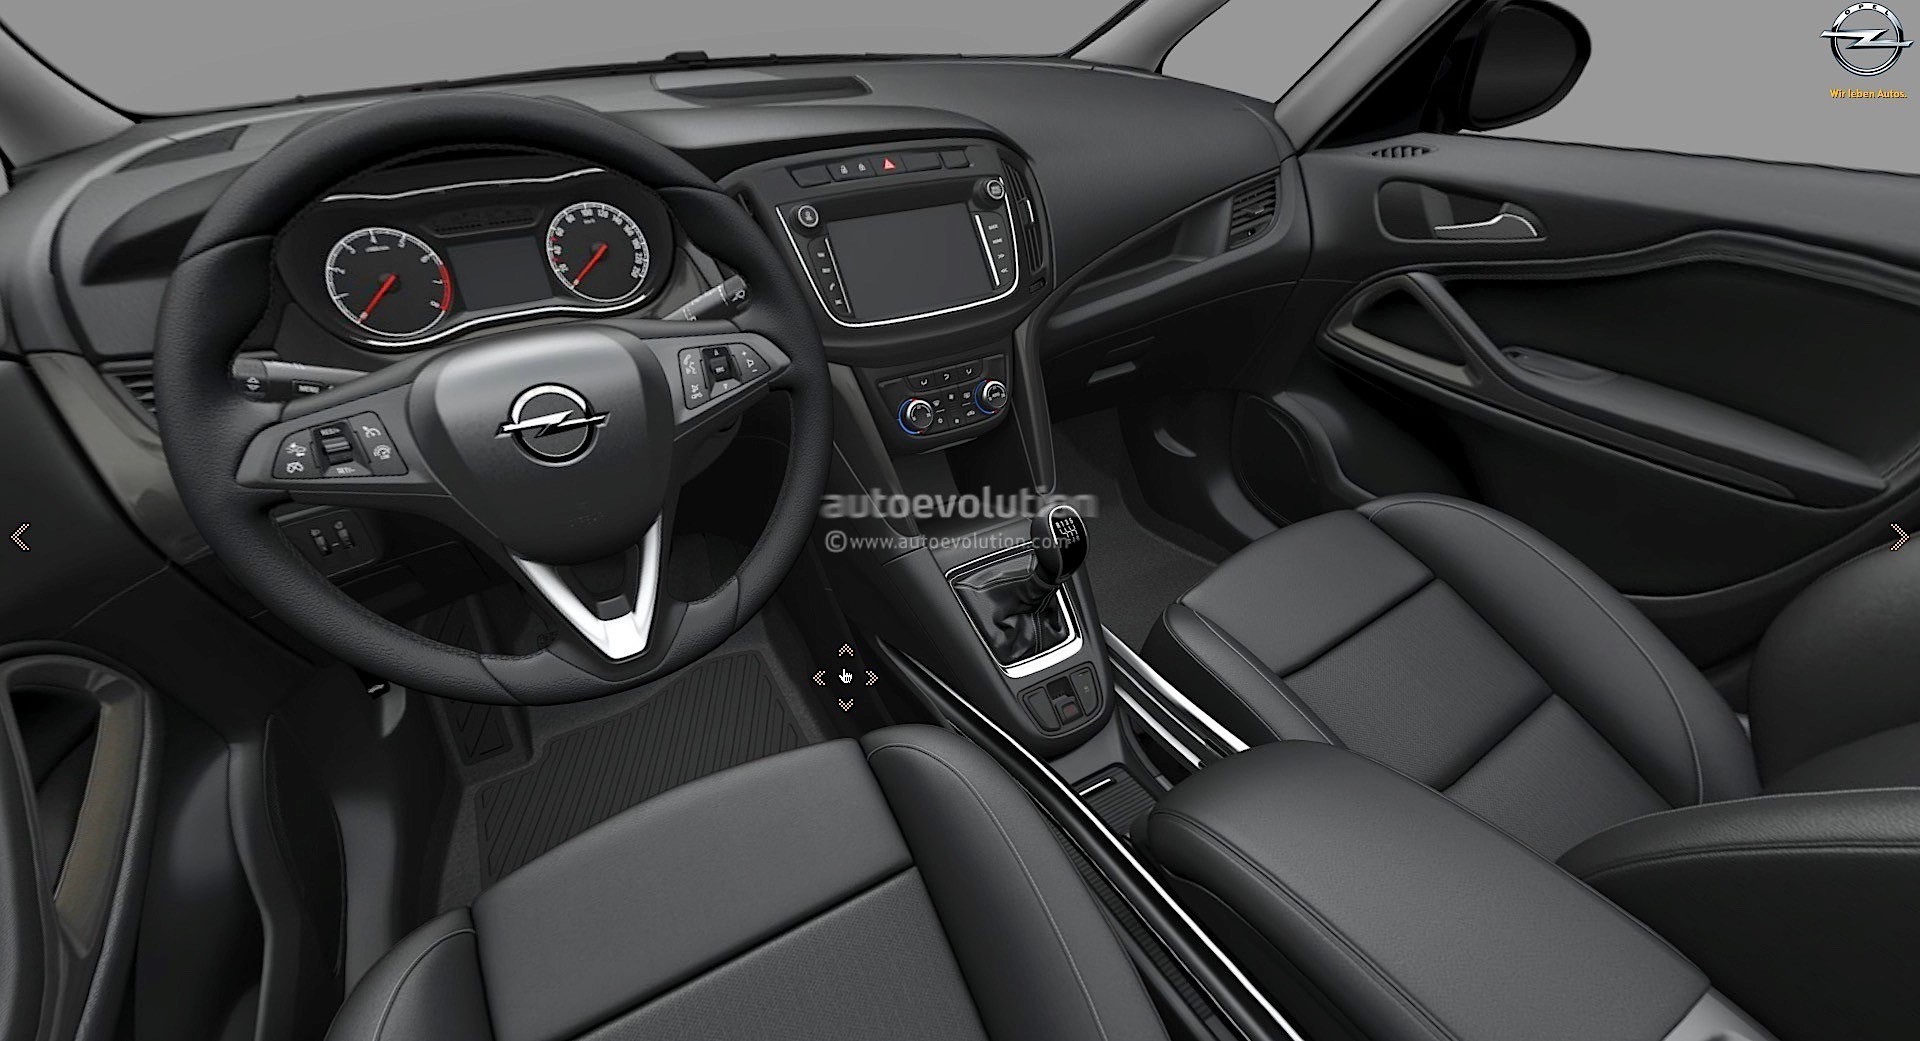 2017-opel-zafira-facelift-leaked-on-gm-website-here-are-the-first-pics_2-autonovosti.me-2